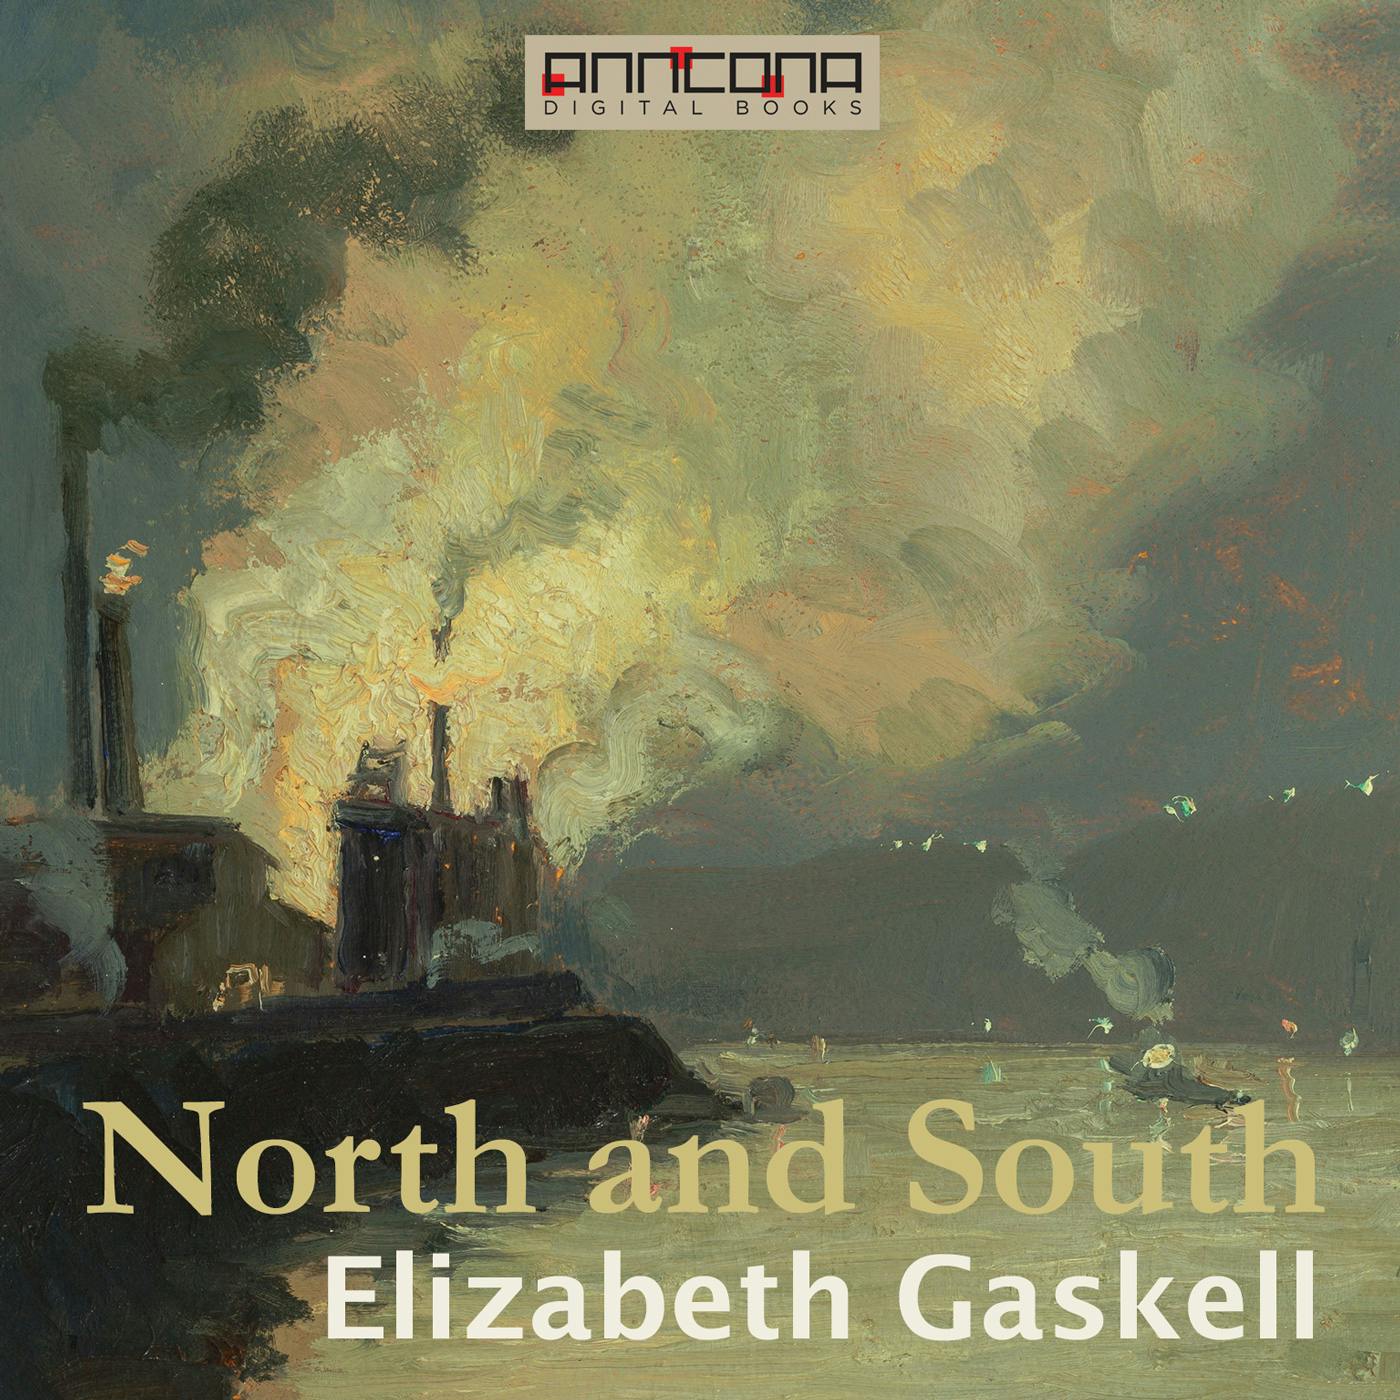 North and South - undefined